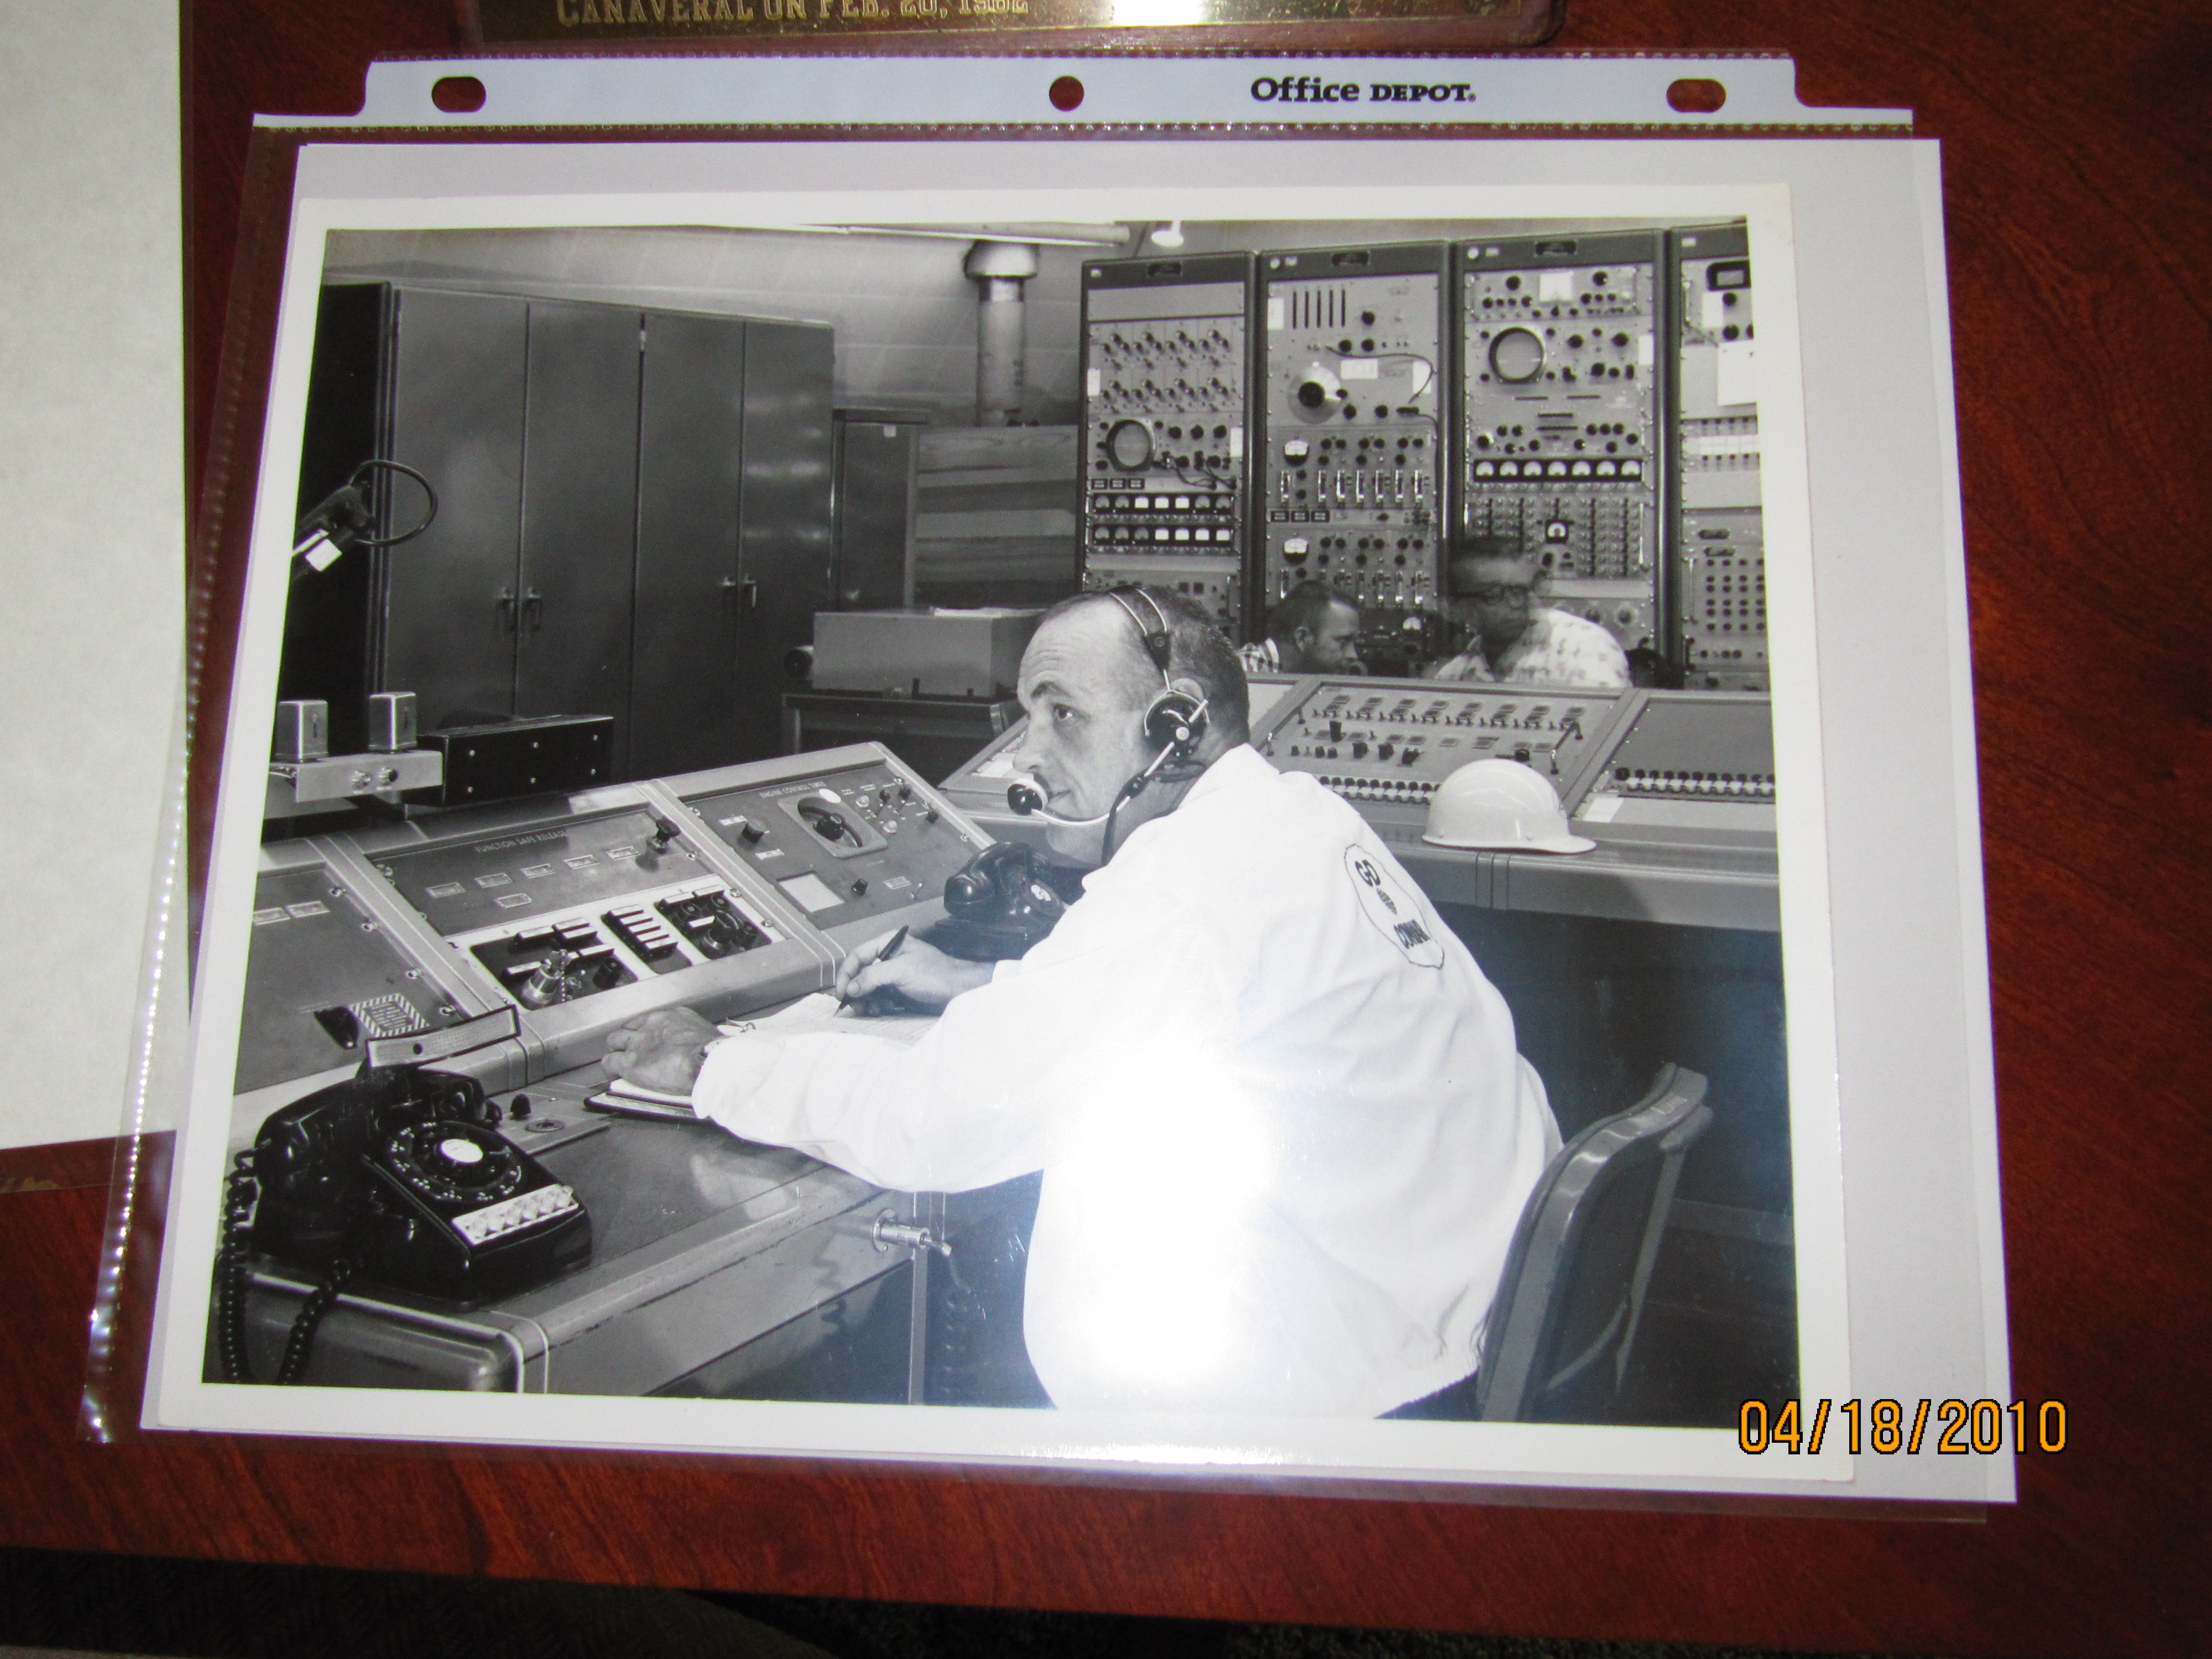 T.J. O’Malley, Test Conductor for the John Glenn launch in Feb. 1962 just before pushing the Engine Start button that launched the first American to orbit the earth.